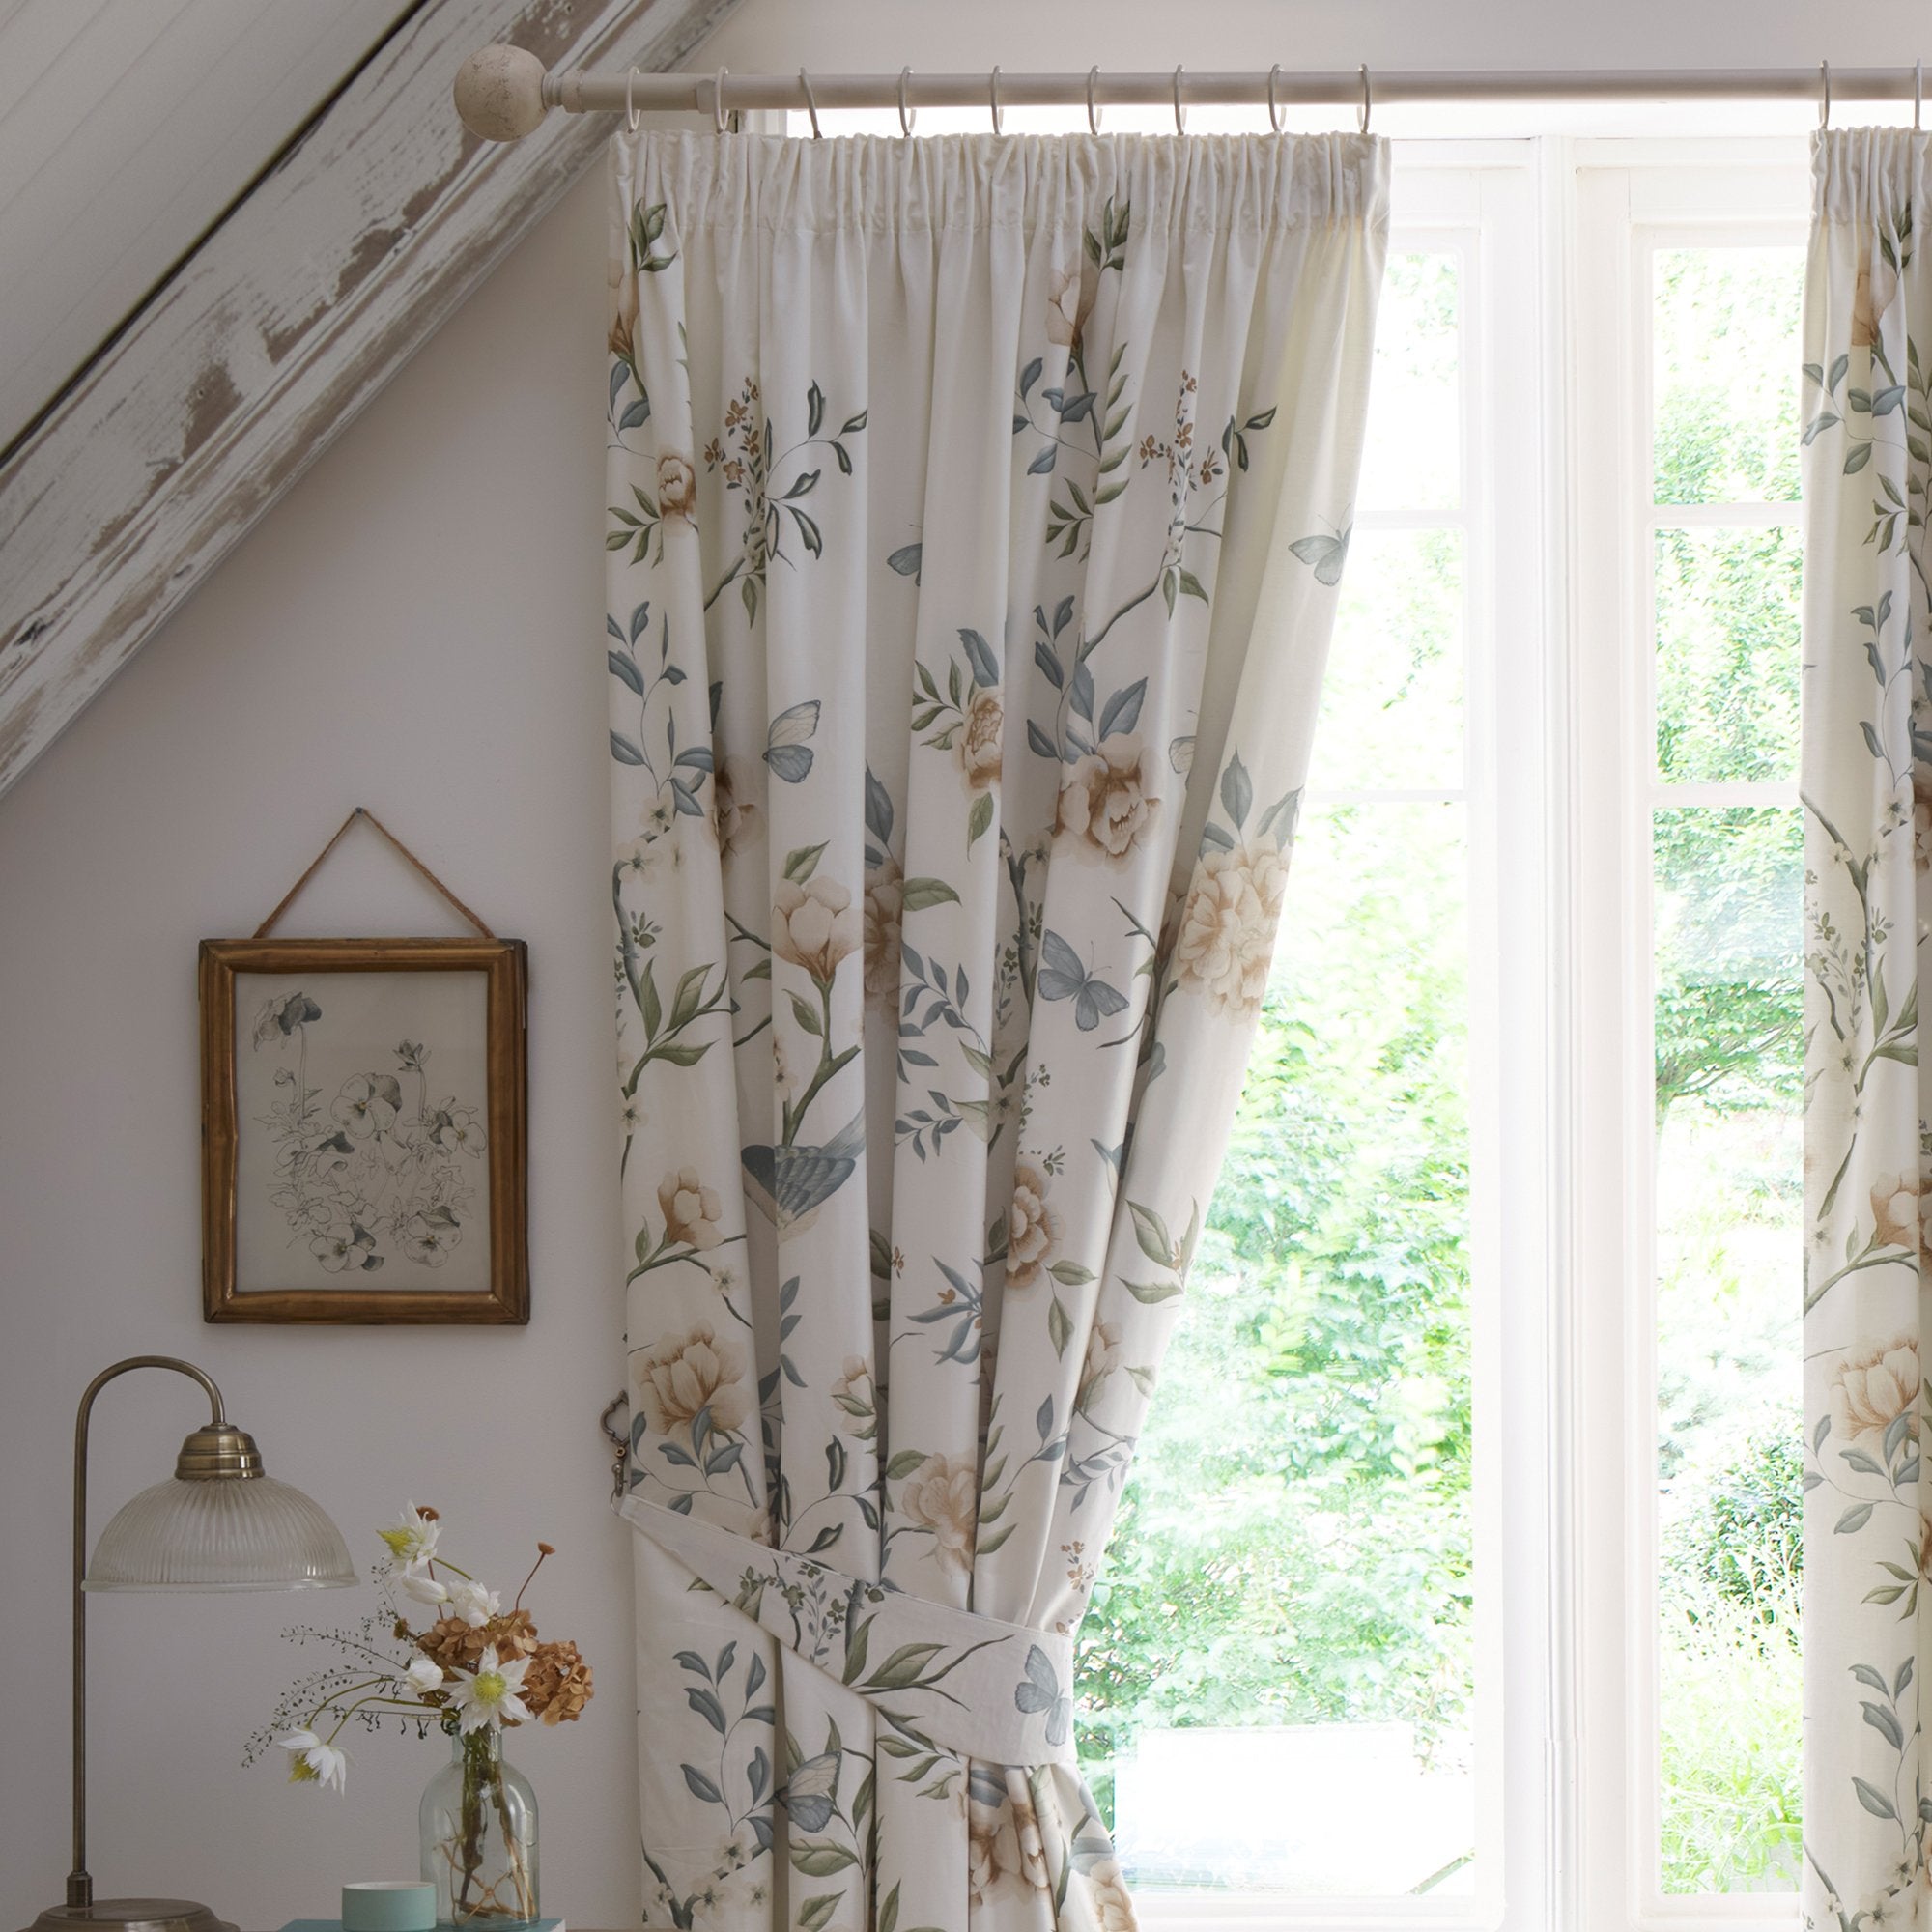 Pair of Pencil Pleat Curtains With Tie-Backs Amelle by Dreams & Drapes Design in Green